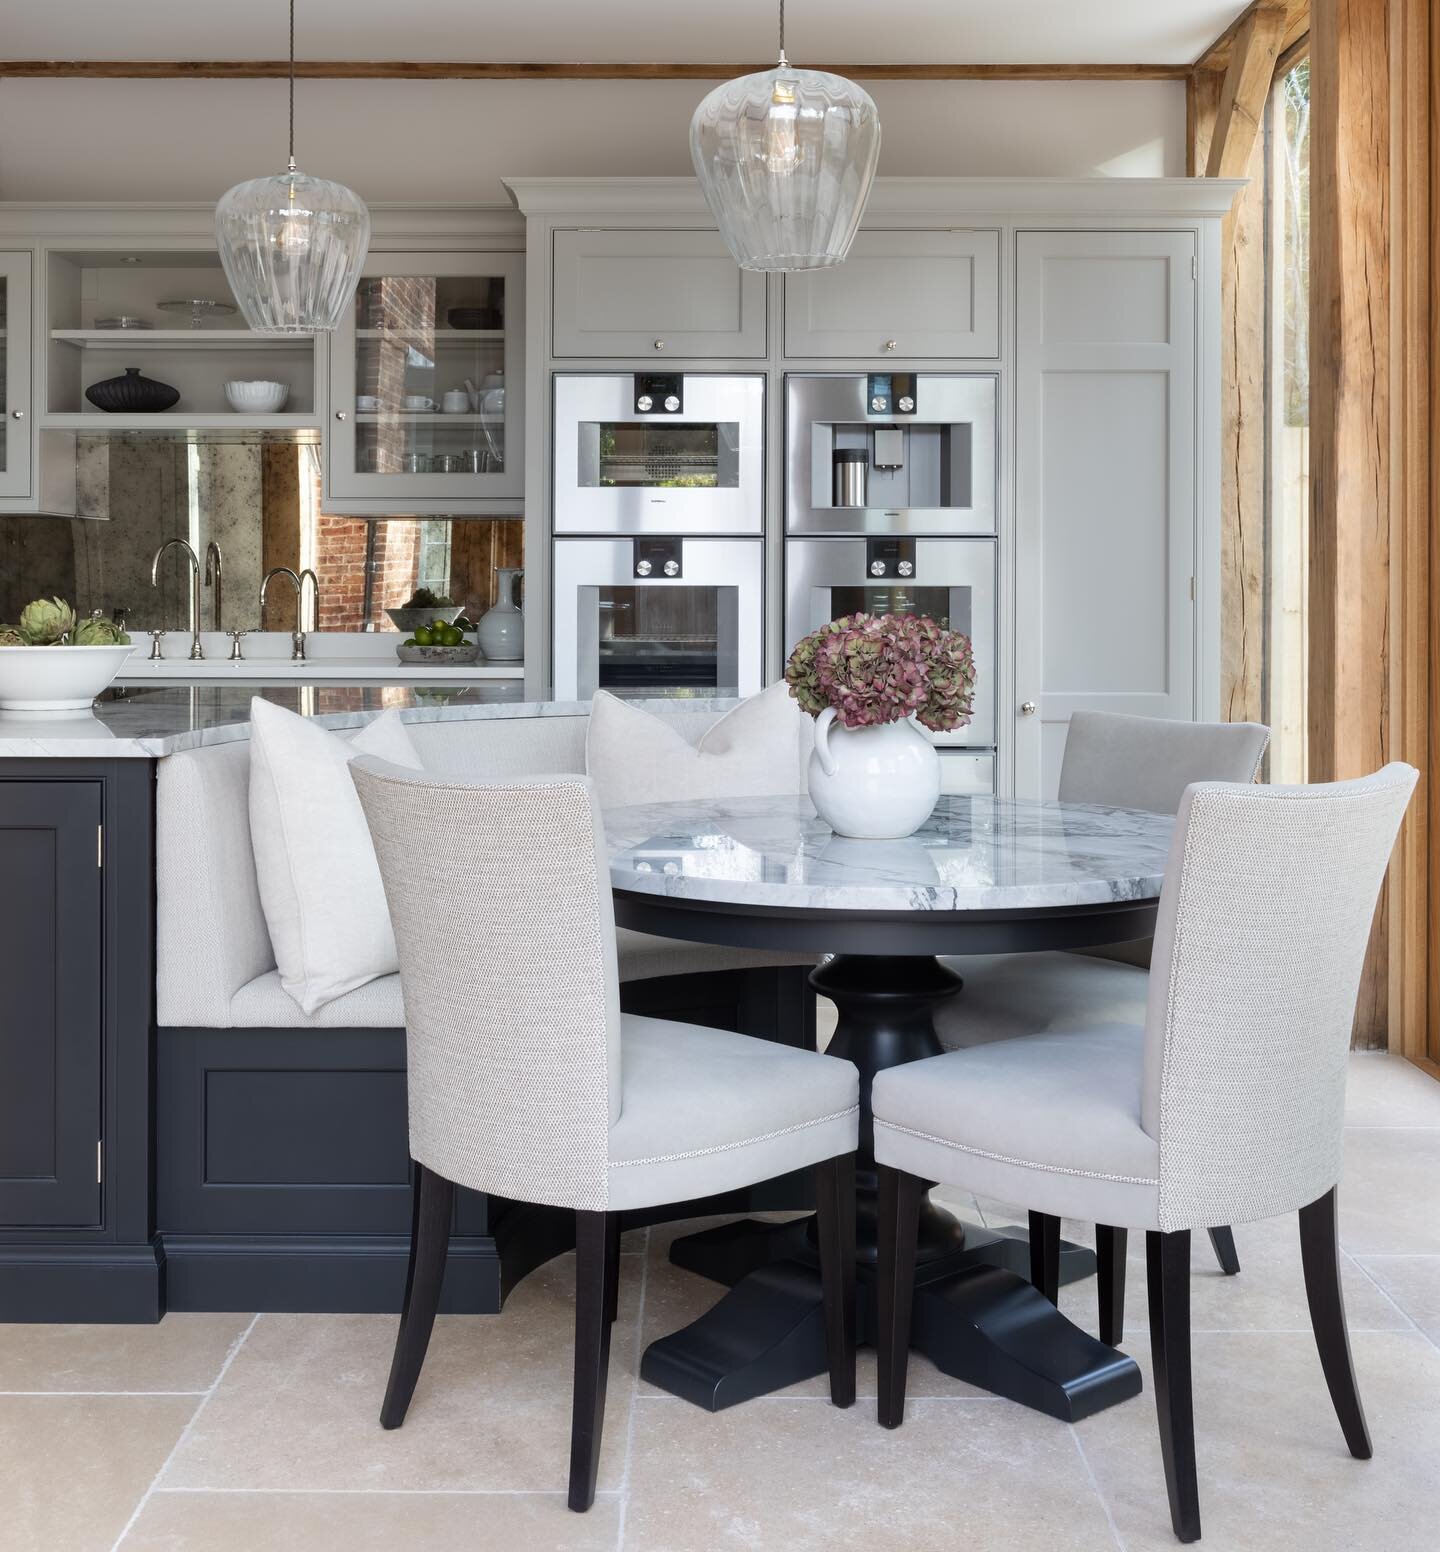 An informal kitchen table with sweeping views out across the garden beyond&hellip; the perfect spot for a cup of coffee, a relaxed family breakfast or a quiet dinner for two. 

As part of our process we spend a great deal of time with each of our cli